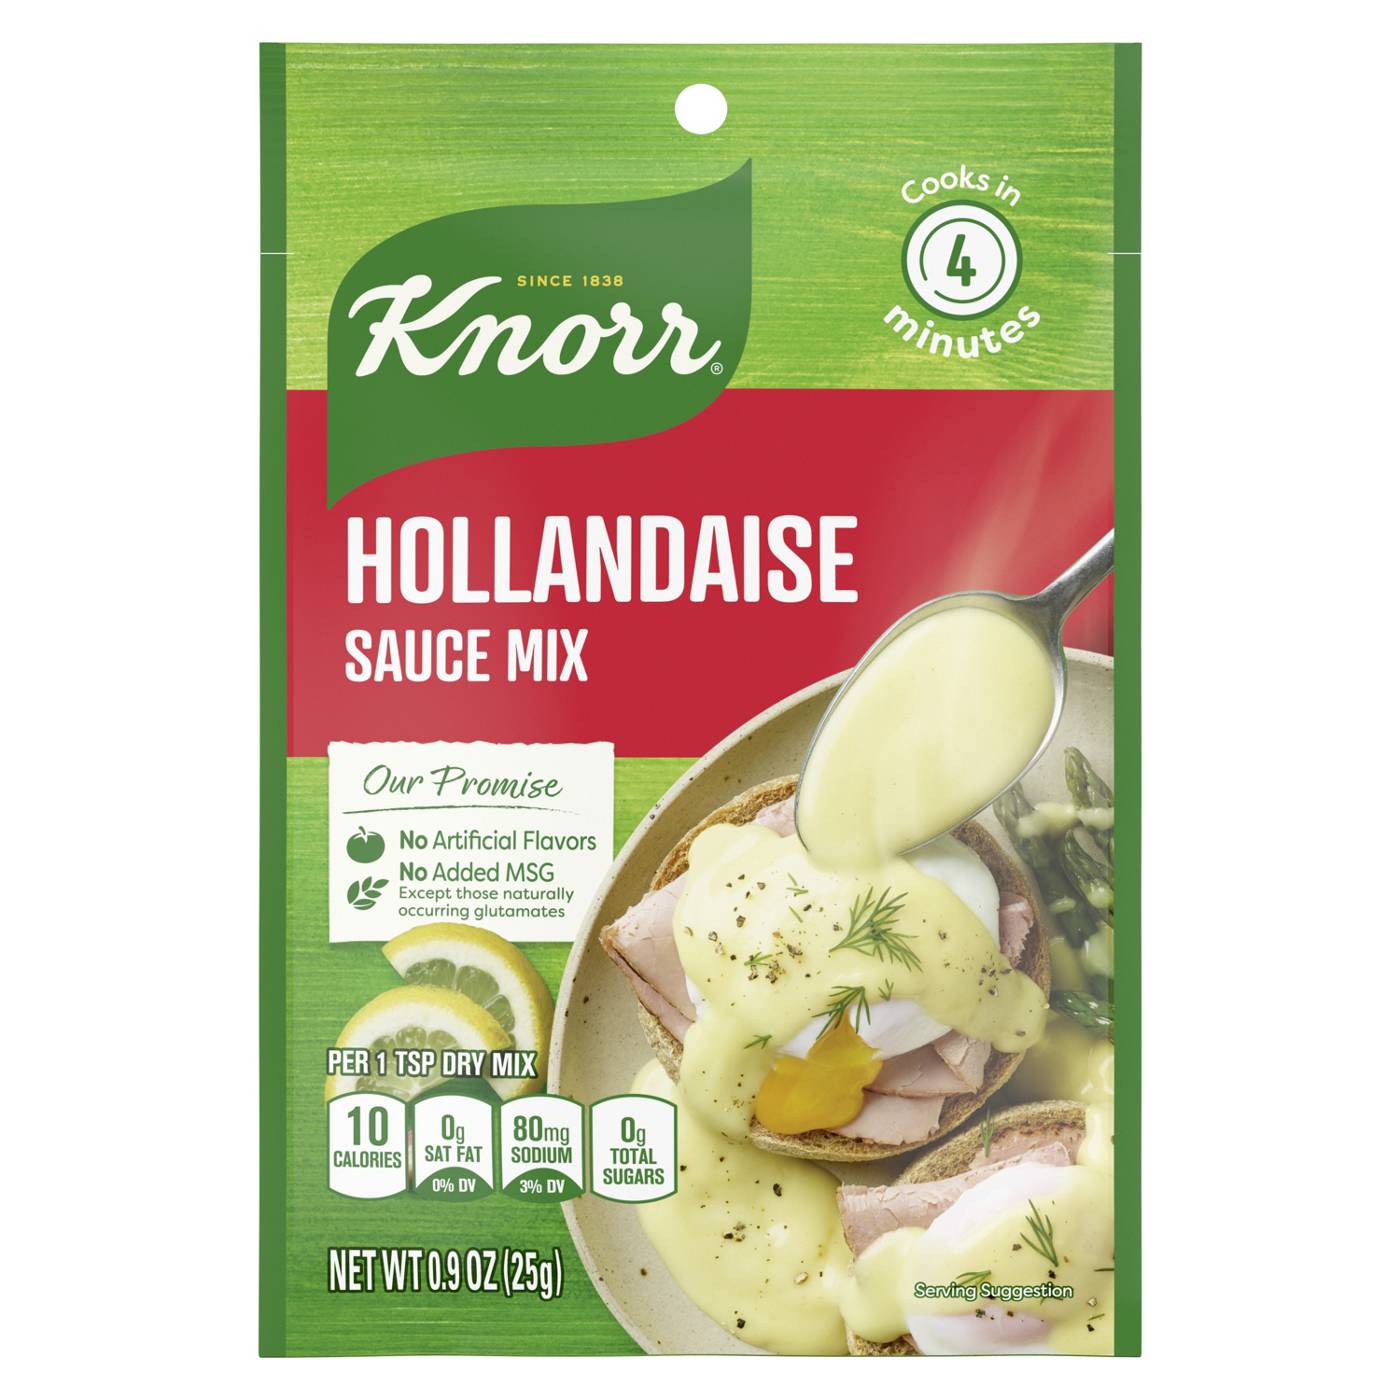 Knorr Sauce Mix Hollandaise; image 1 of 3